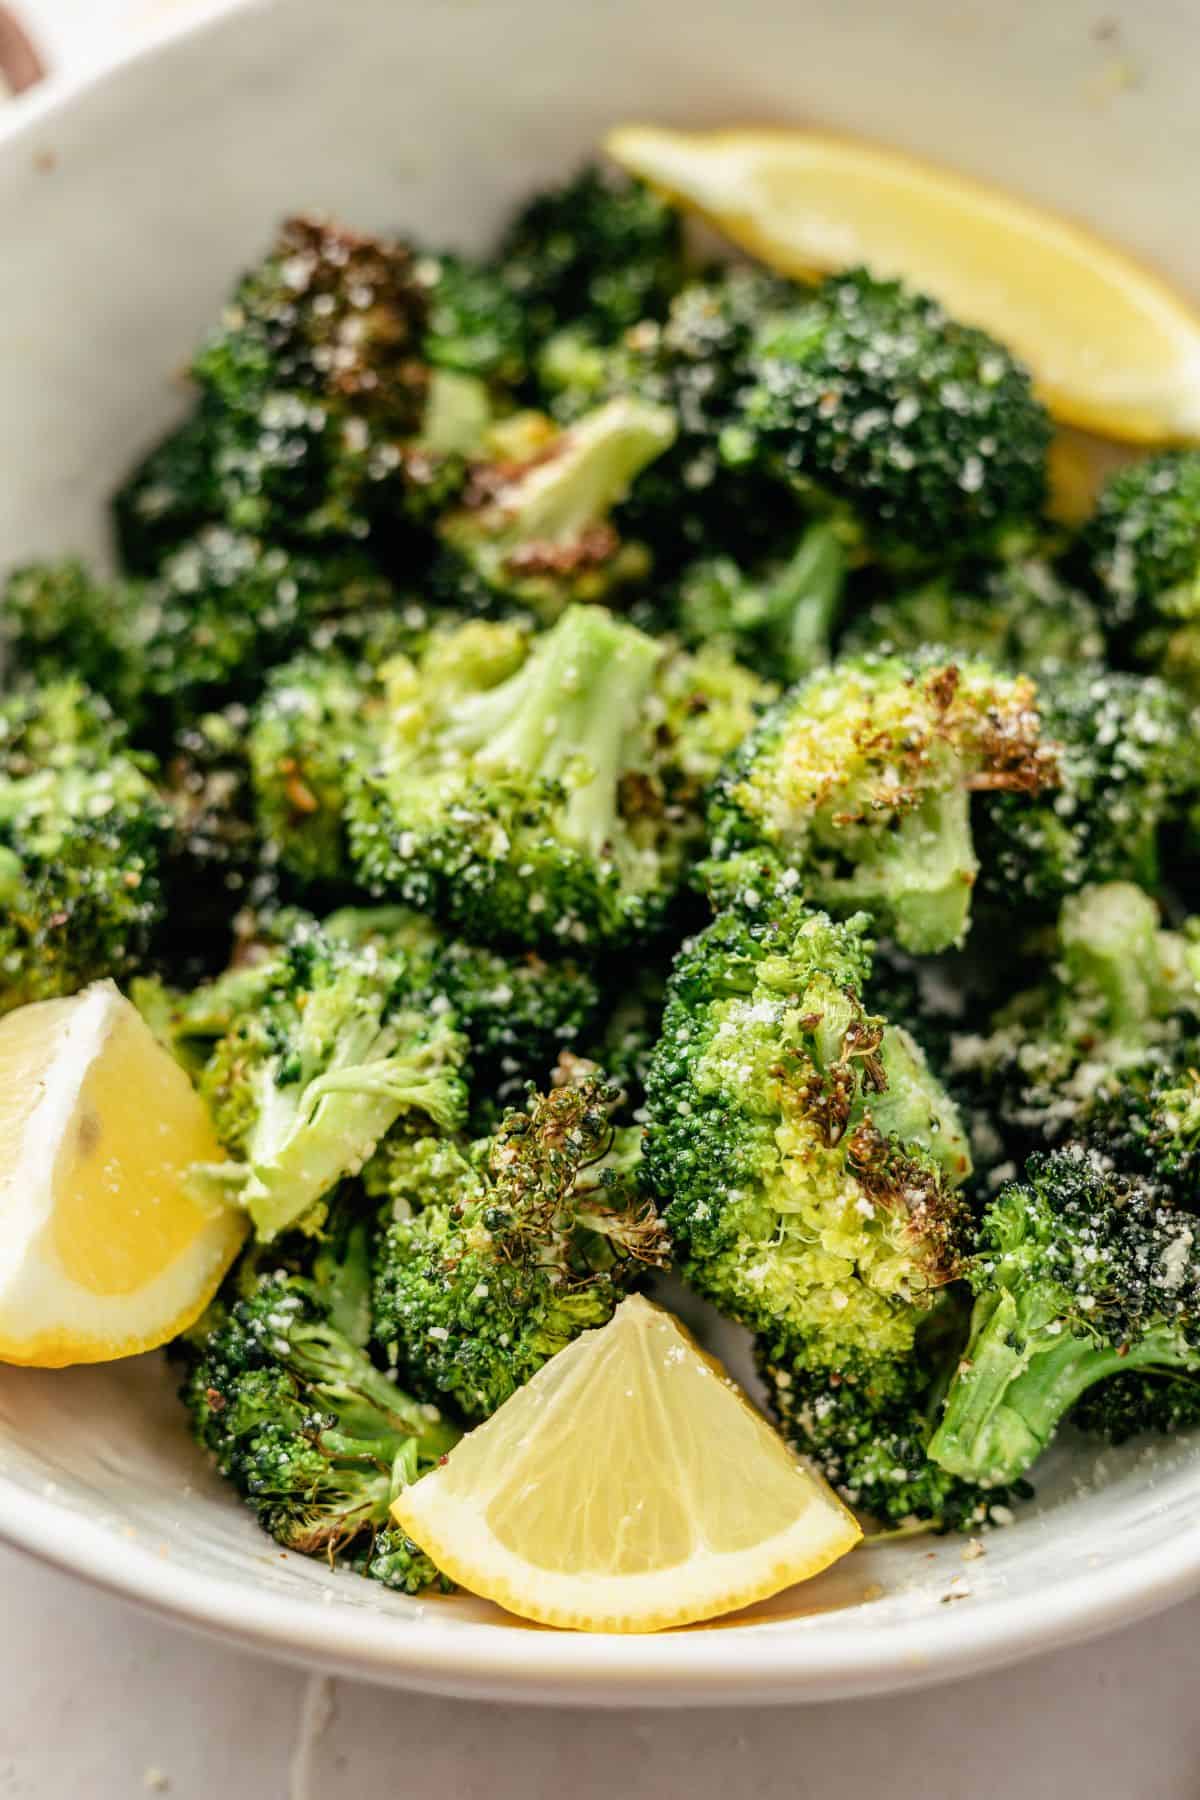 cooked and seasoned Broccoli on a large bowl with some slices of lemon